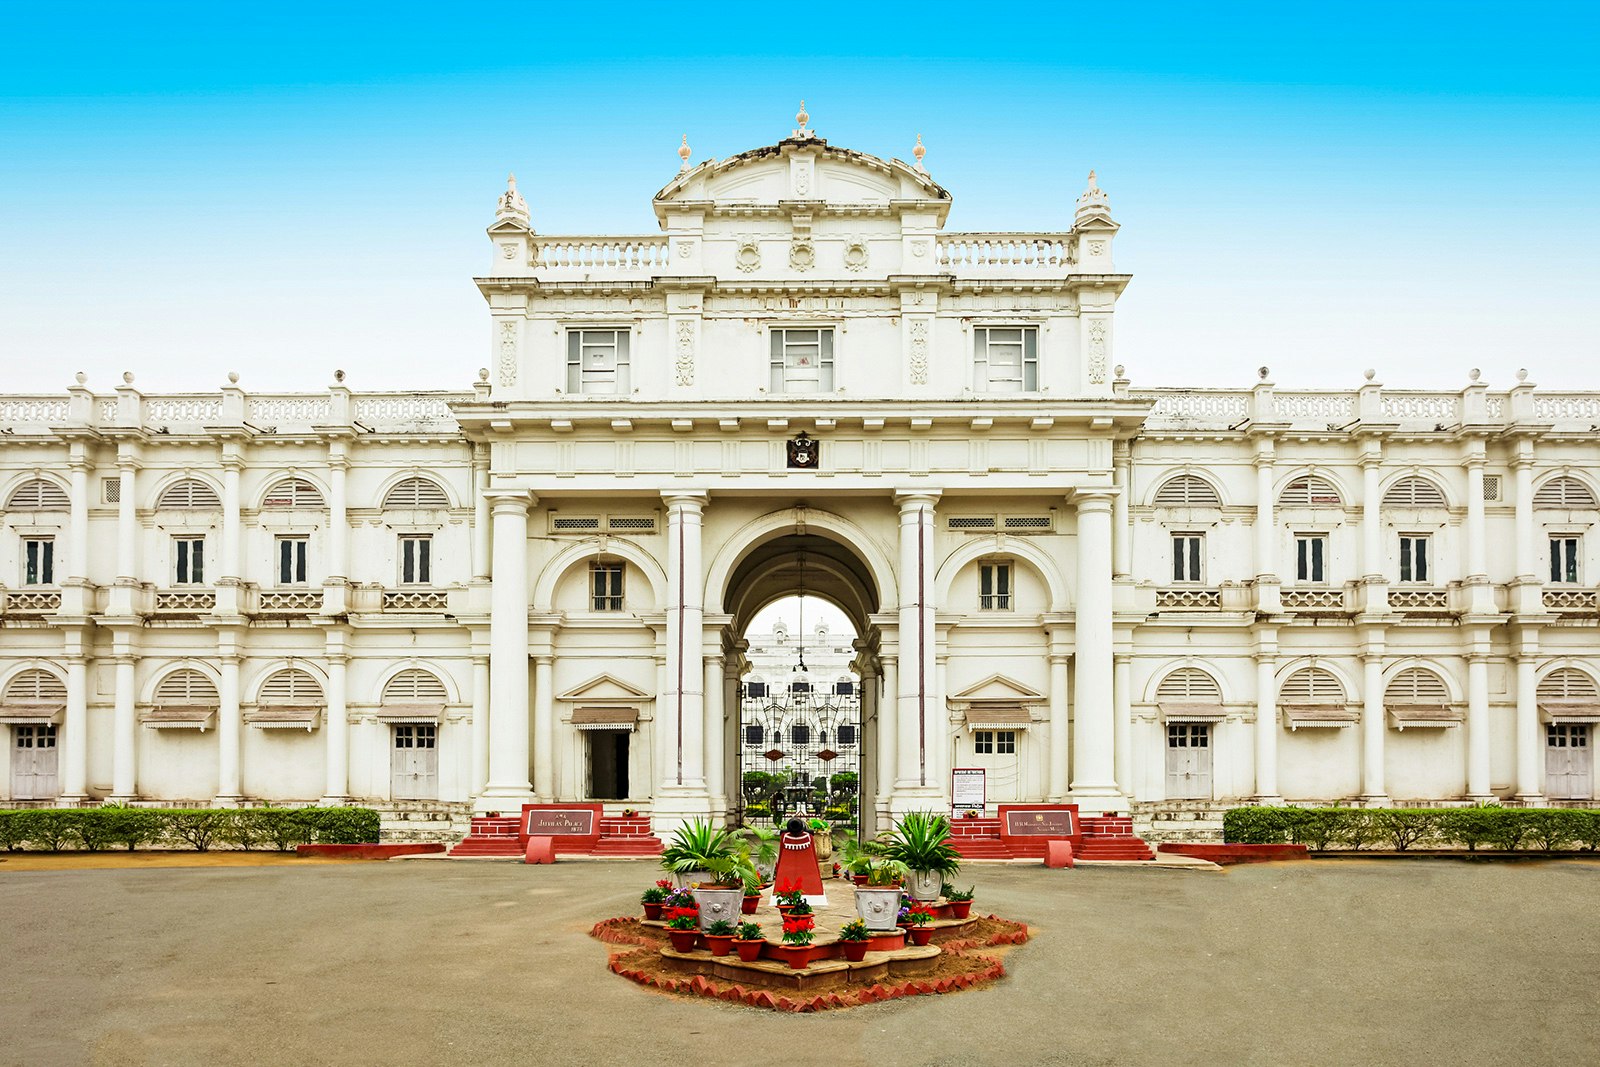 The entrance of the white Jai Vilas Palace; the exterior is covered in columns and arches, and a small garden sits in the foreground. Madhya Pradesh, India.